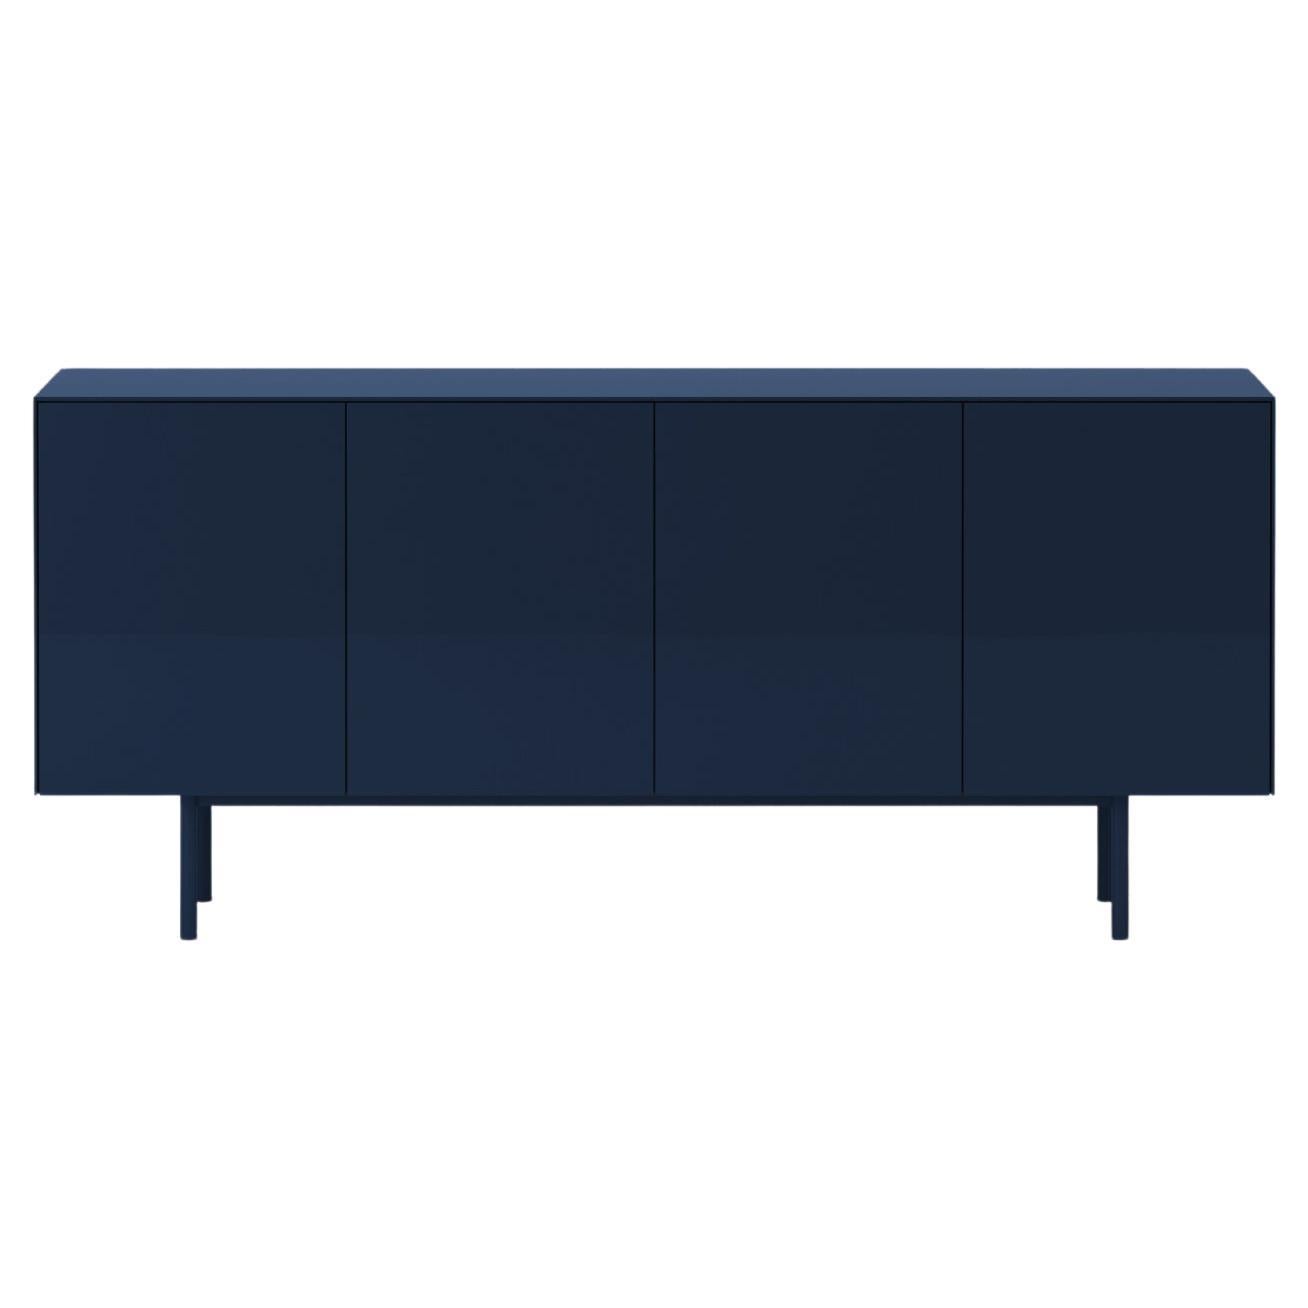 The 44 Server in hand polished navy lacquer